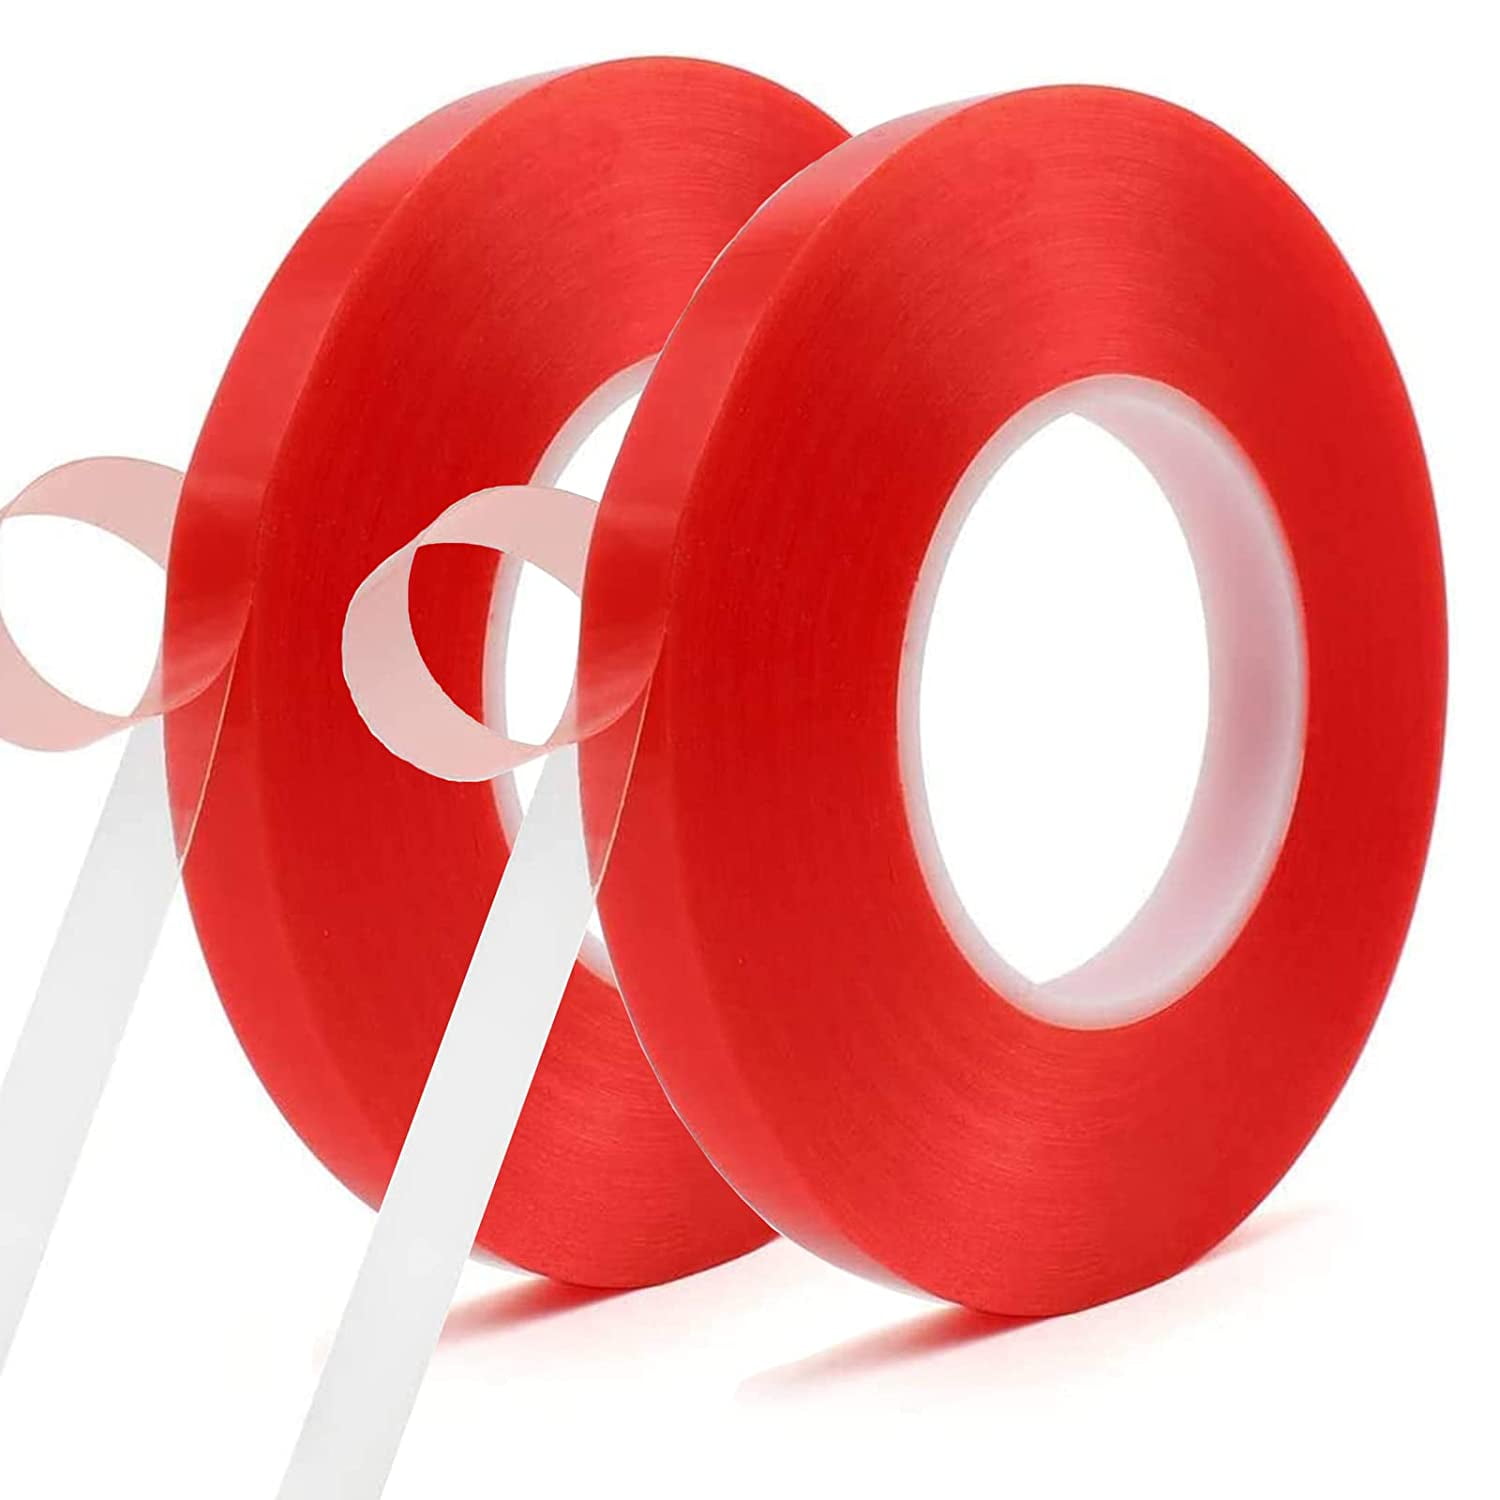 Waroomhouse Photo-safe Glue Tape Sure Here's A Product Title for Listing  Glue Tape Roller Retractable Double Sided Tape Roller Scrapbooking Adhesive  Tape for Home 